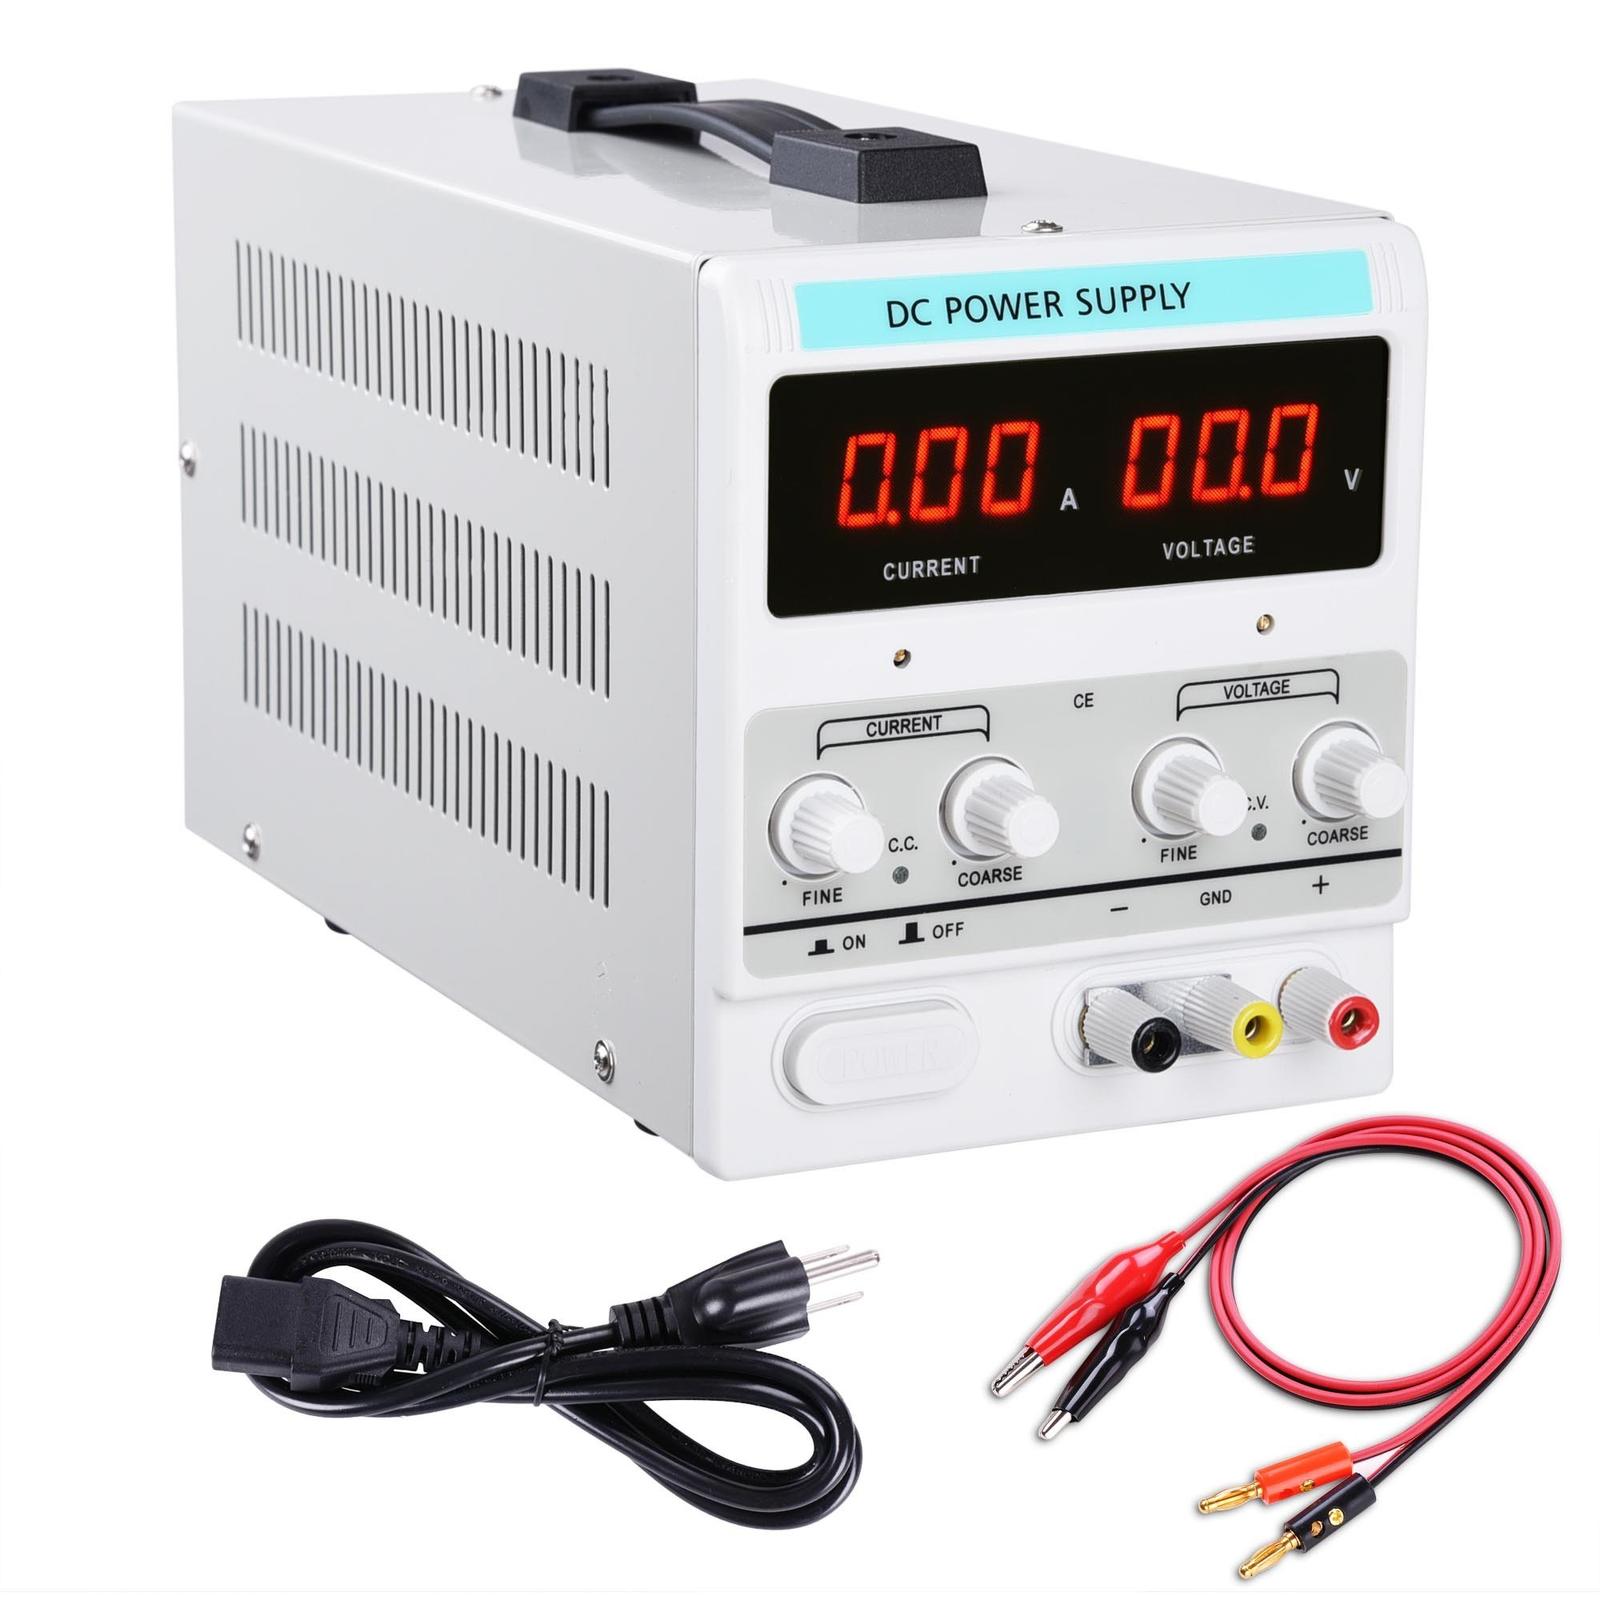 Digital DC power supply with cables